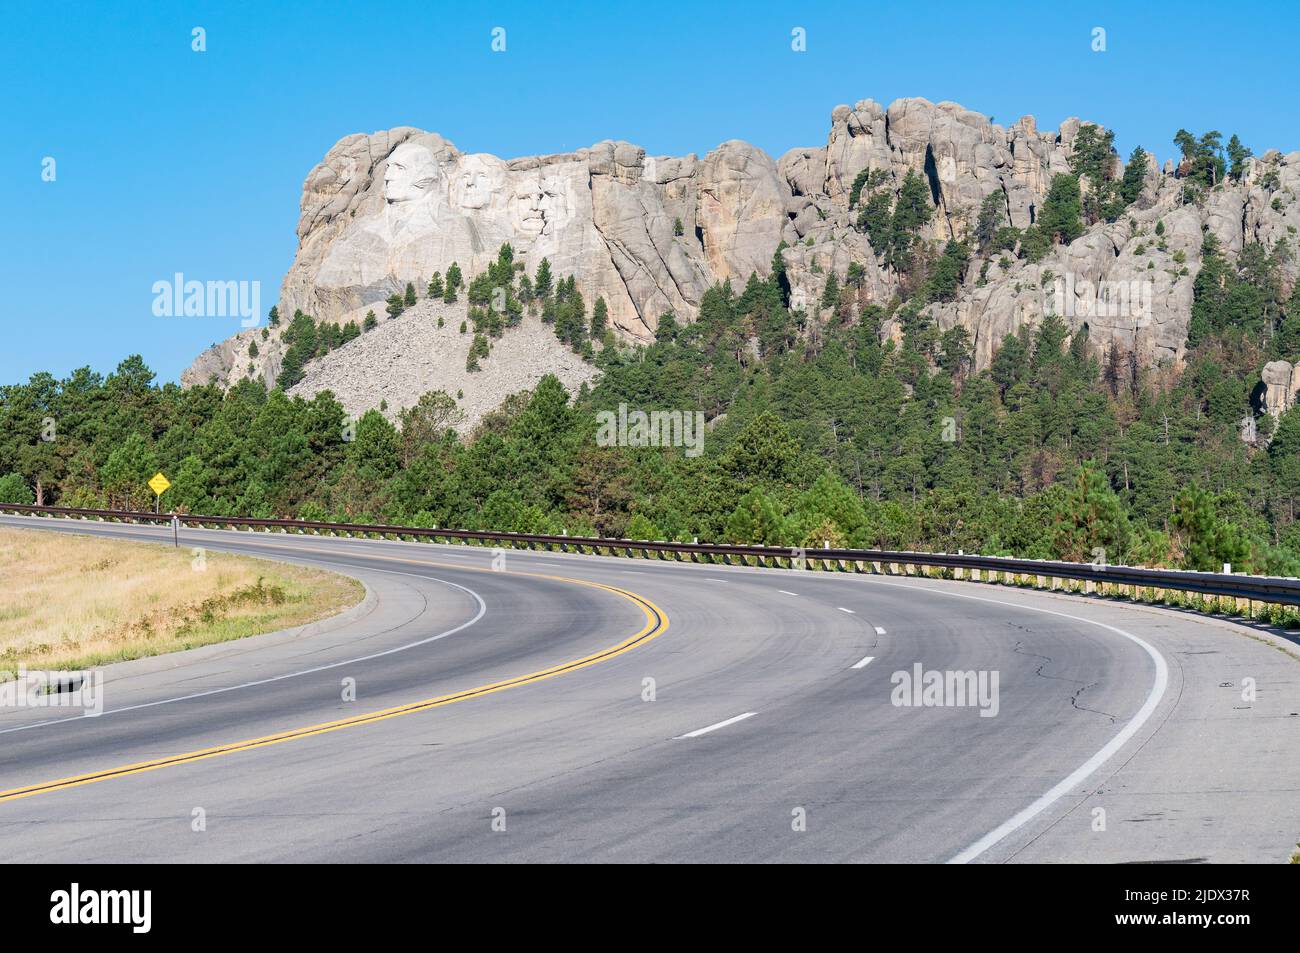 Keystone, SD - August 29, 2020: Mount Rushmore as seen from the highway approaching Mount Rushmore National Park Stock Photo